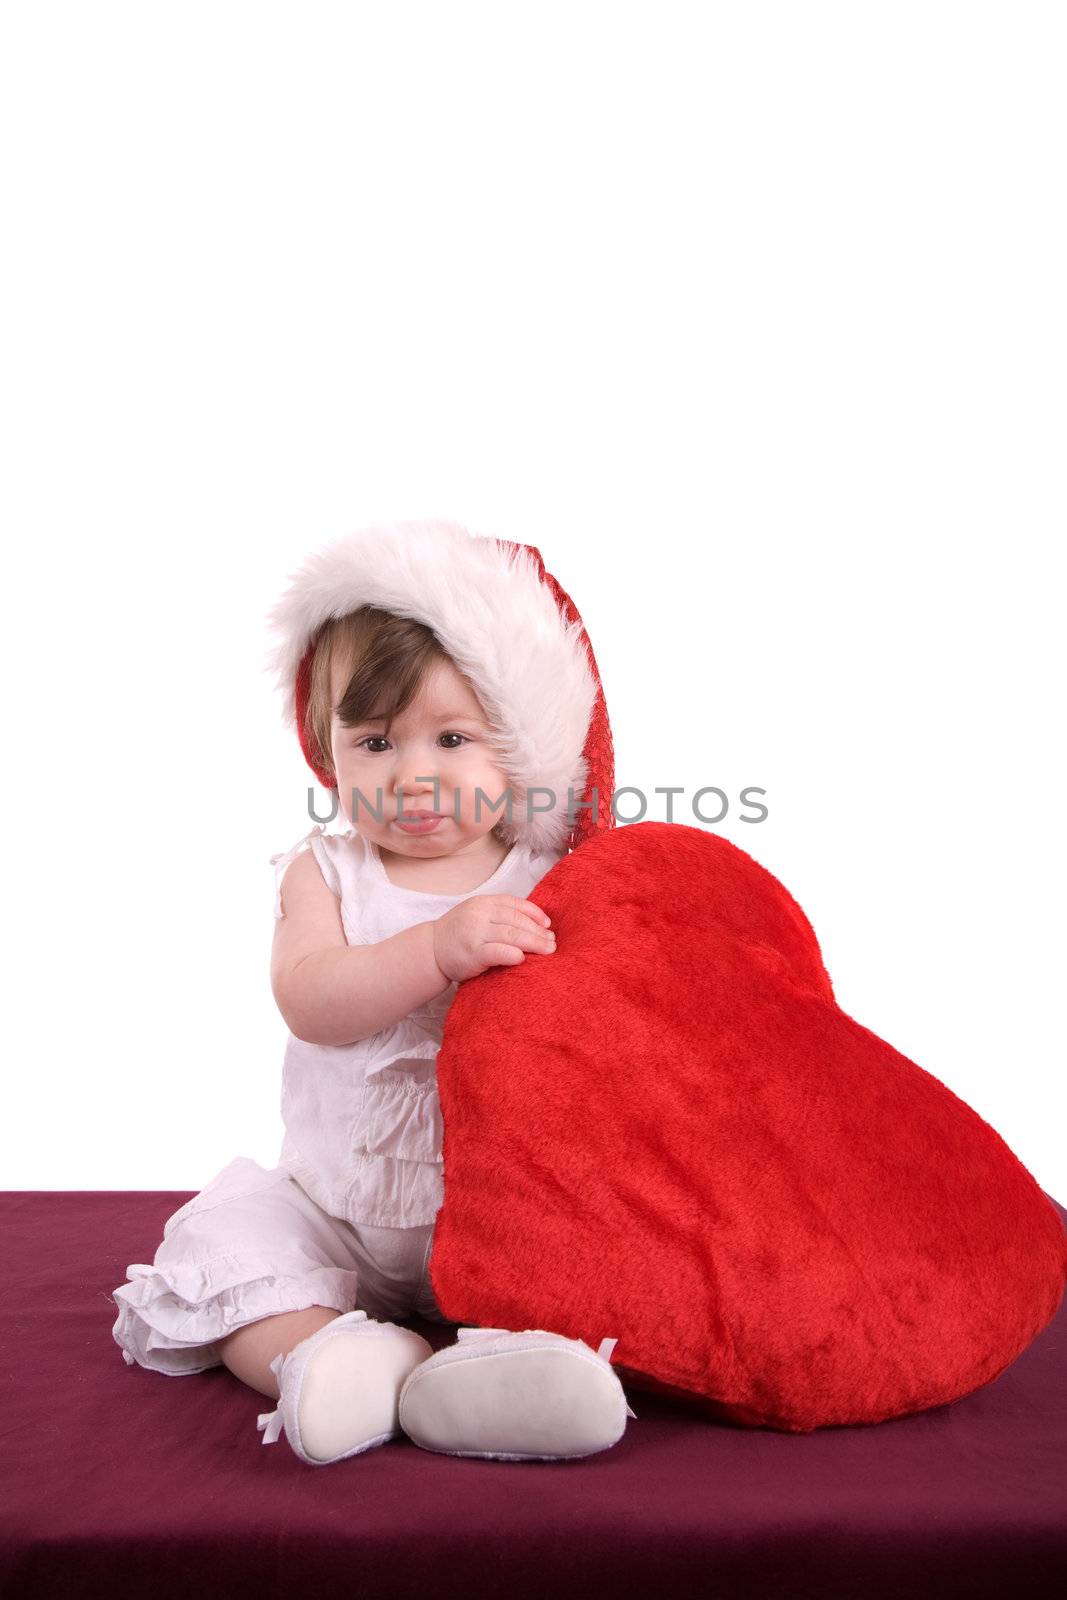 Cute little baby holding a big red heart and wearing a santa hat